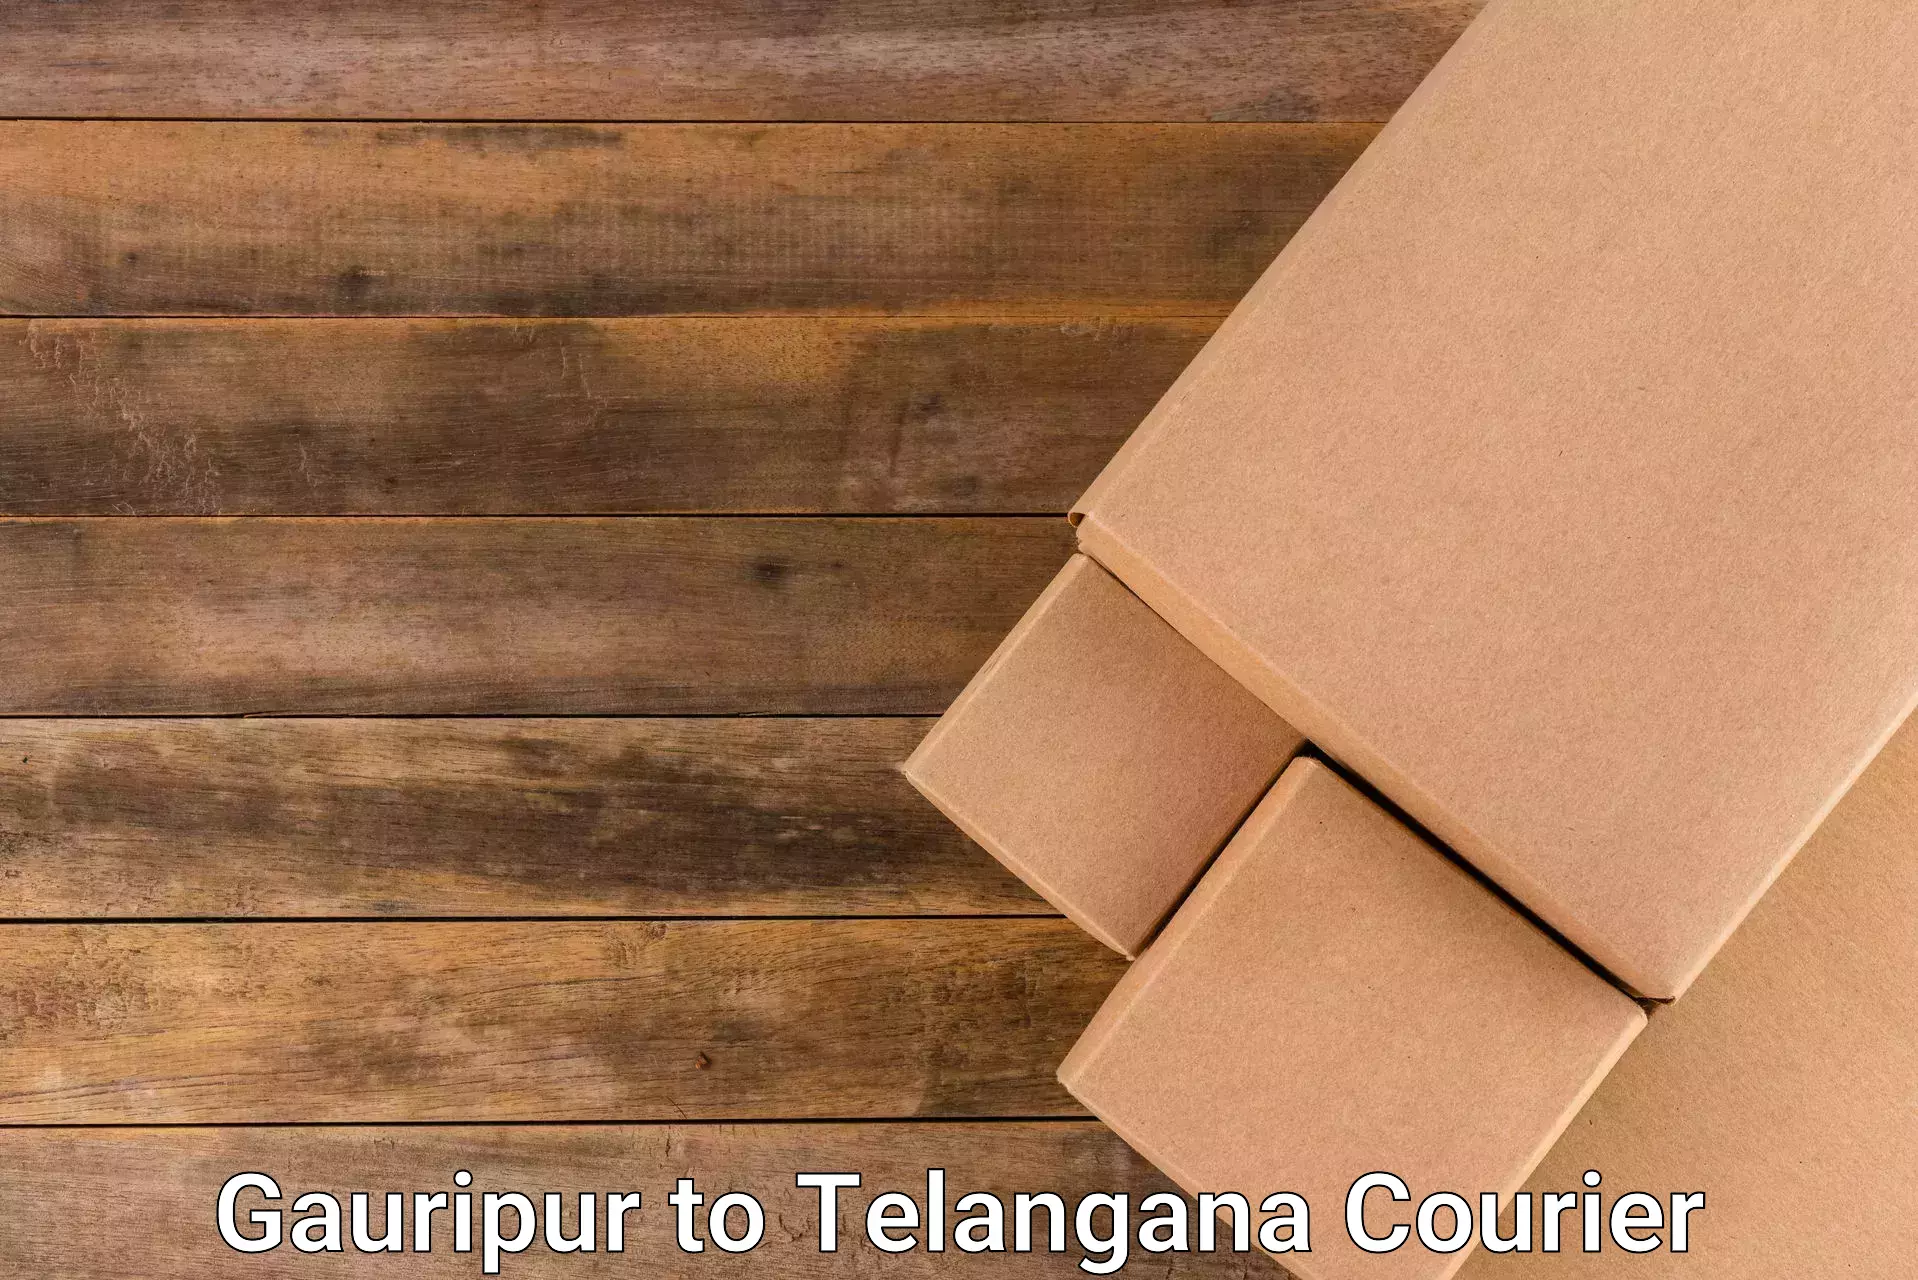 User-friendly delivery service Gauripur to Telangana